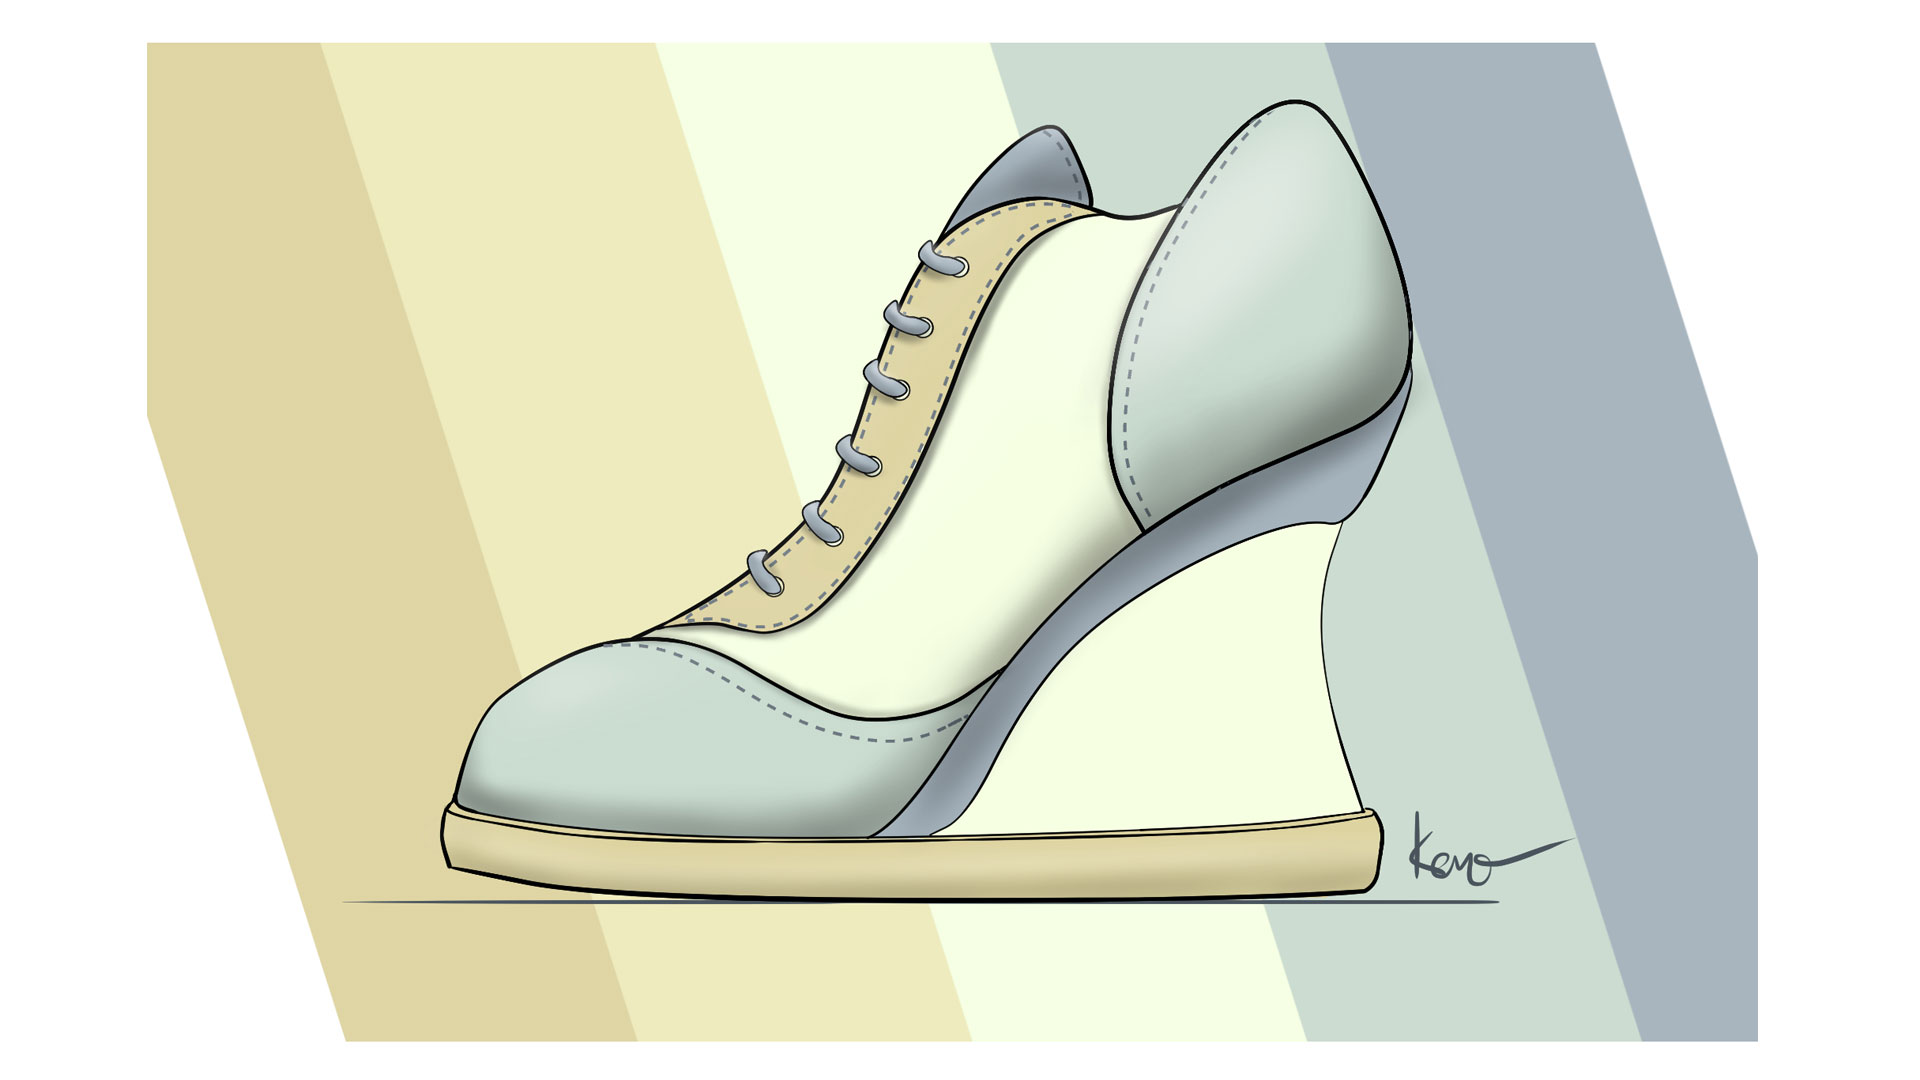 Wedge Sneakers concept